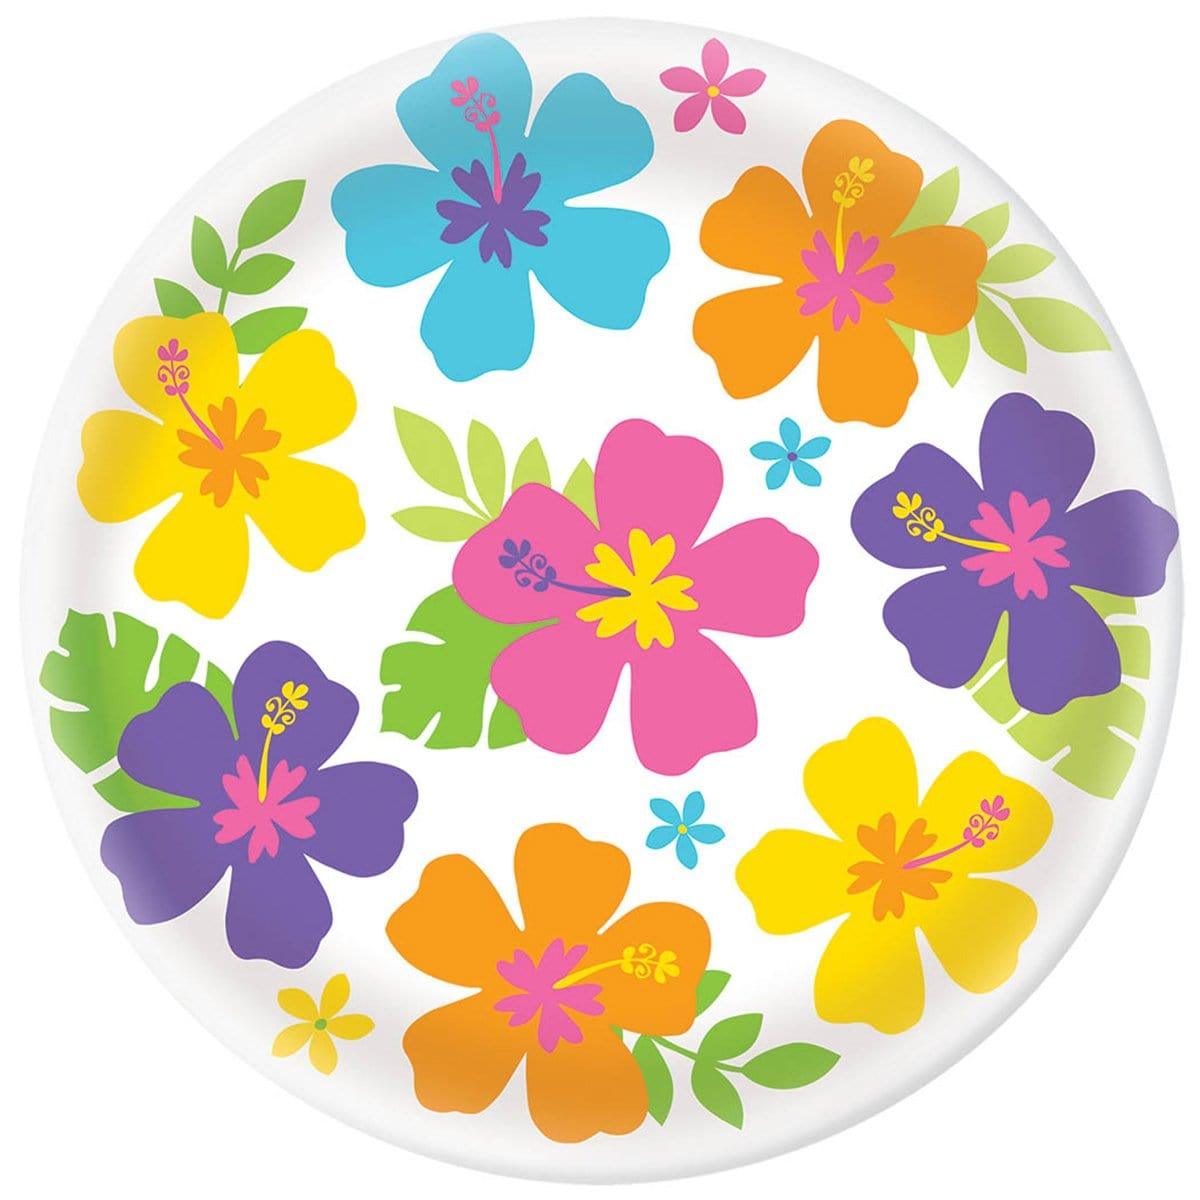 Buy Theme Party Hibiscus Round Platter, 13.5 Inches sold at Party Expert